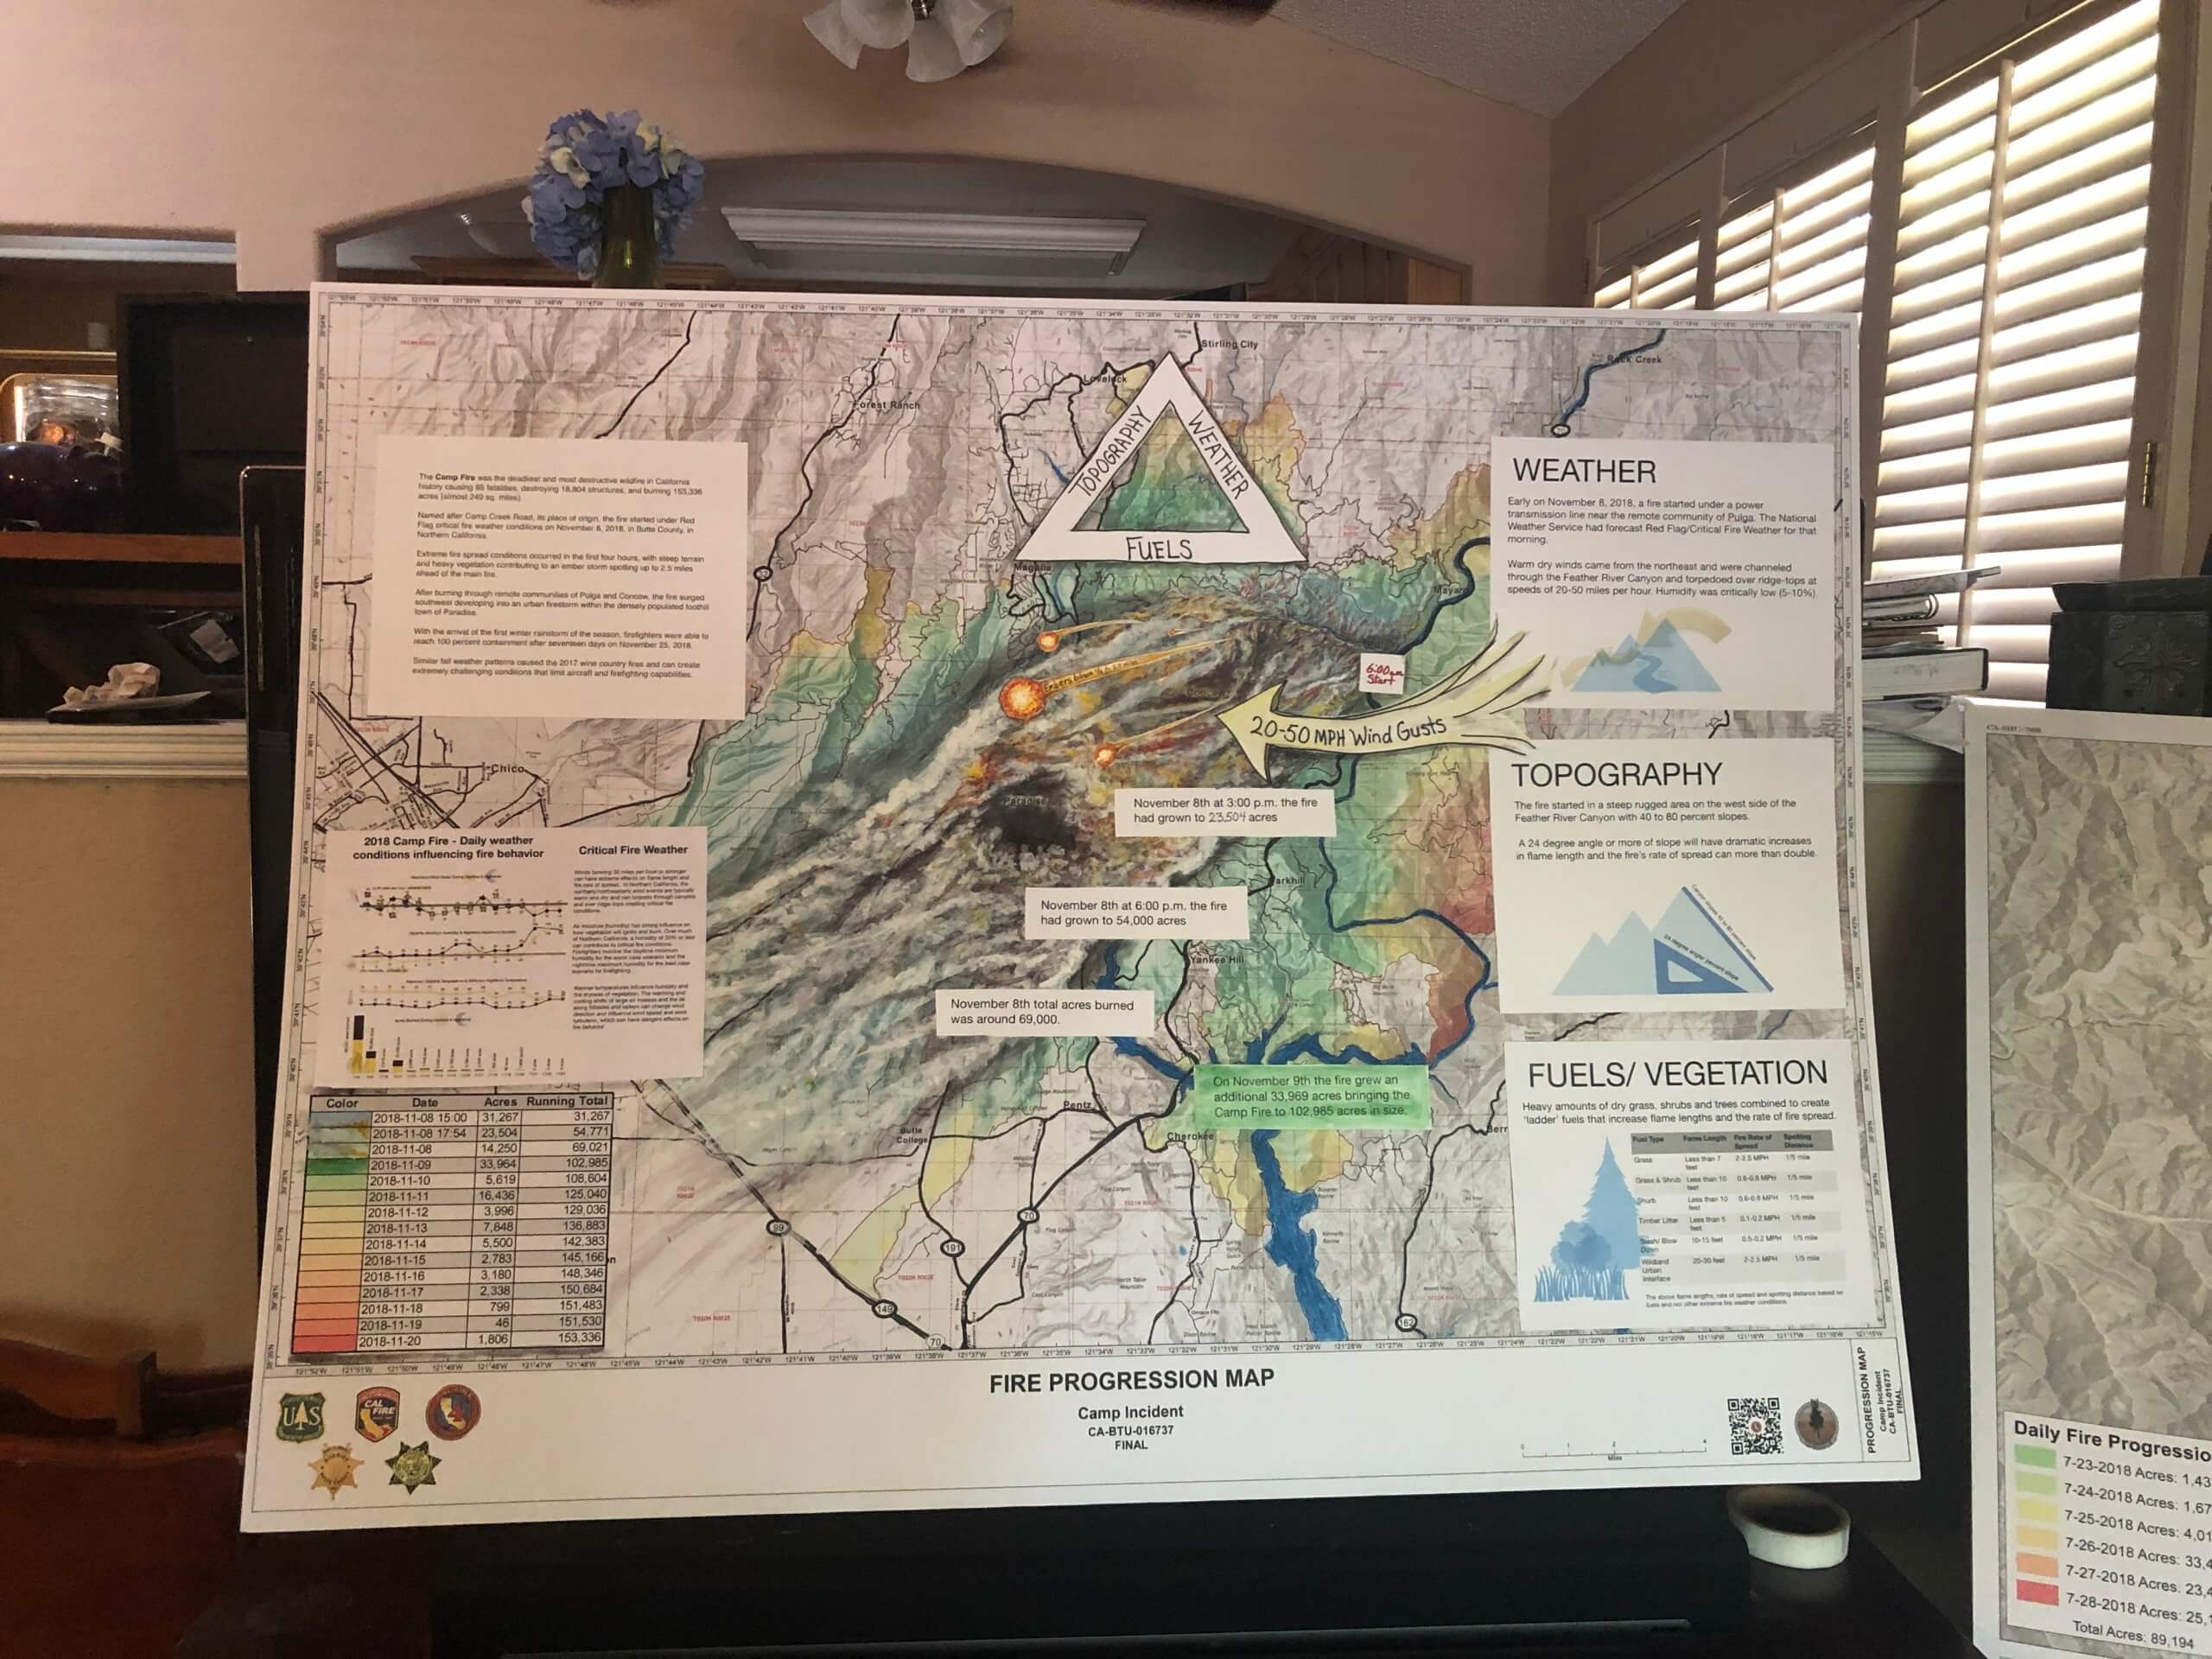 Use incident information and map to enhance and visualize the fire story. The artist used a fire-progression map of the Camp Fire and local weather information about daily fire growth while paining smoke over a single day’s burn period.